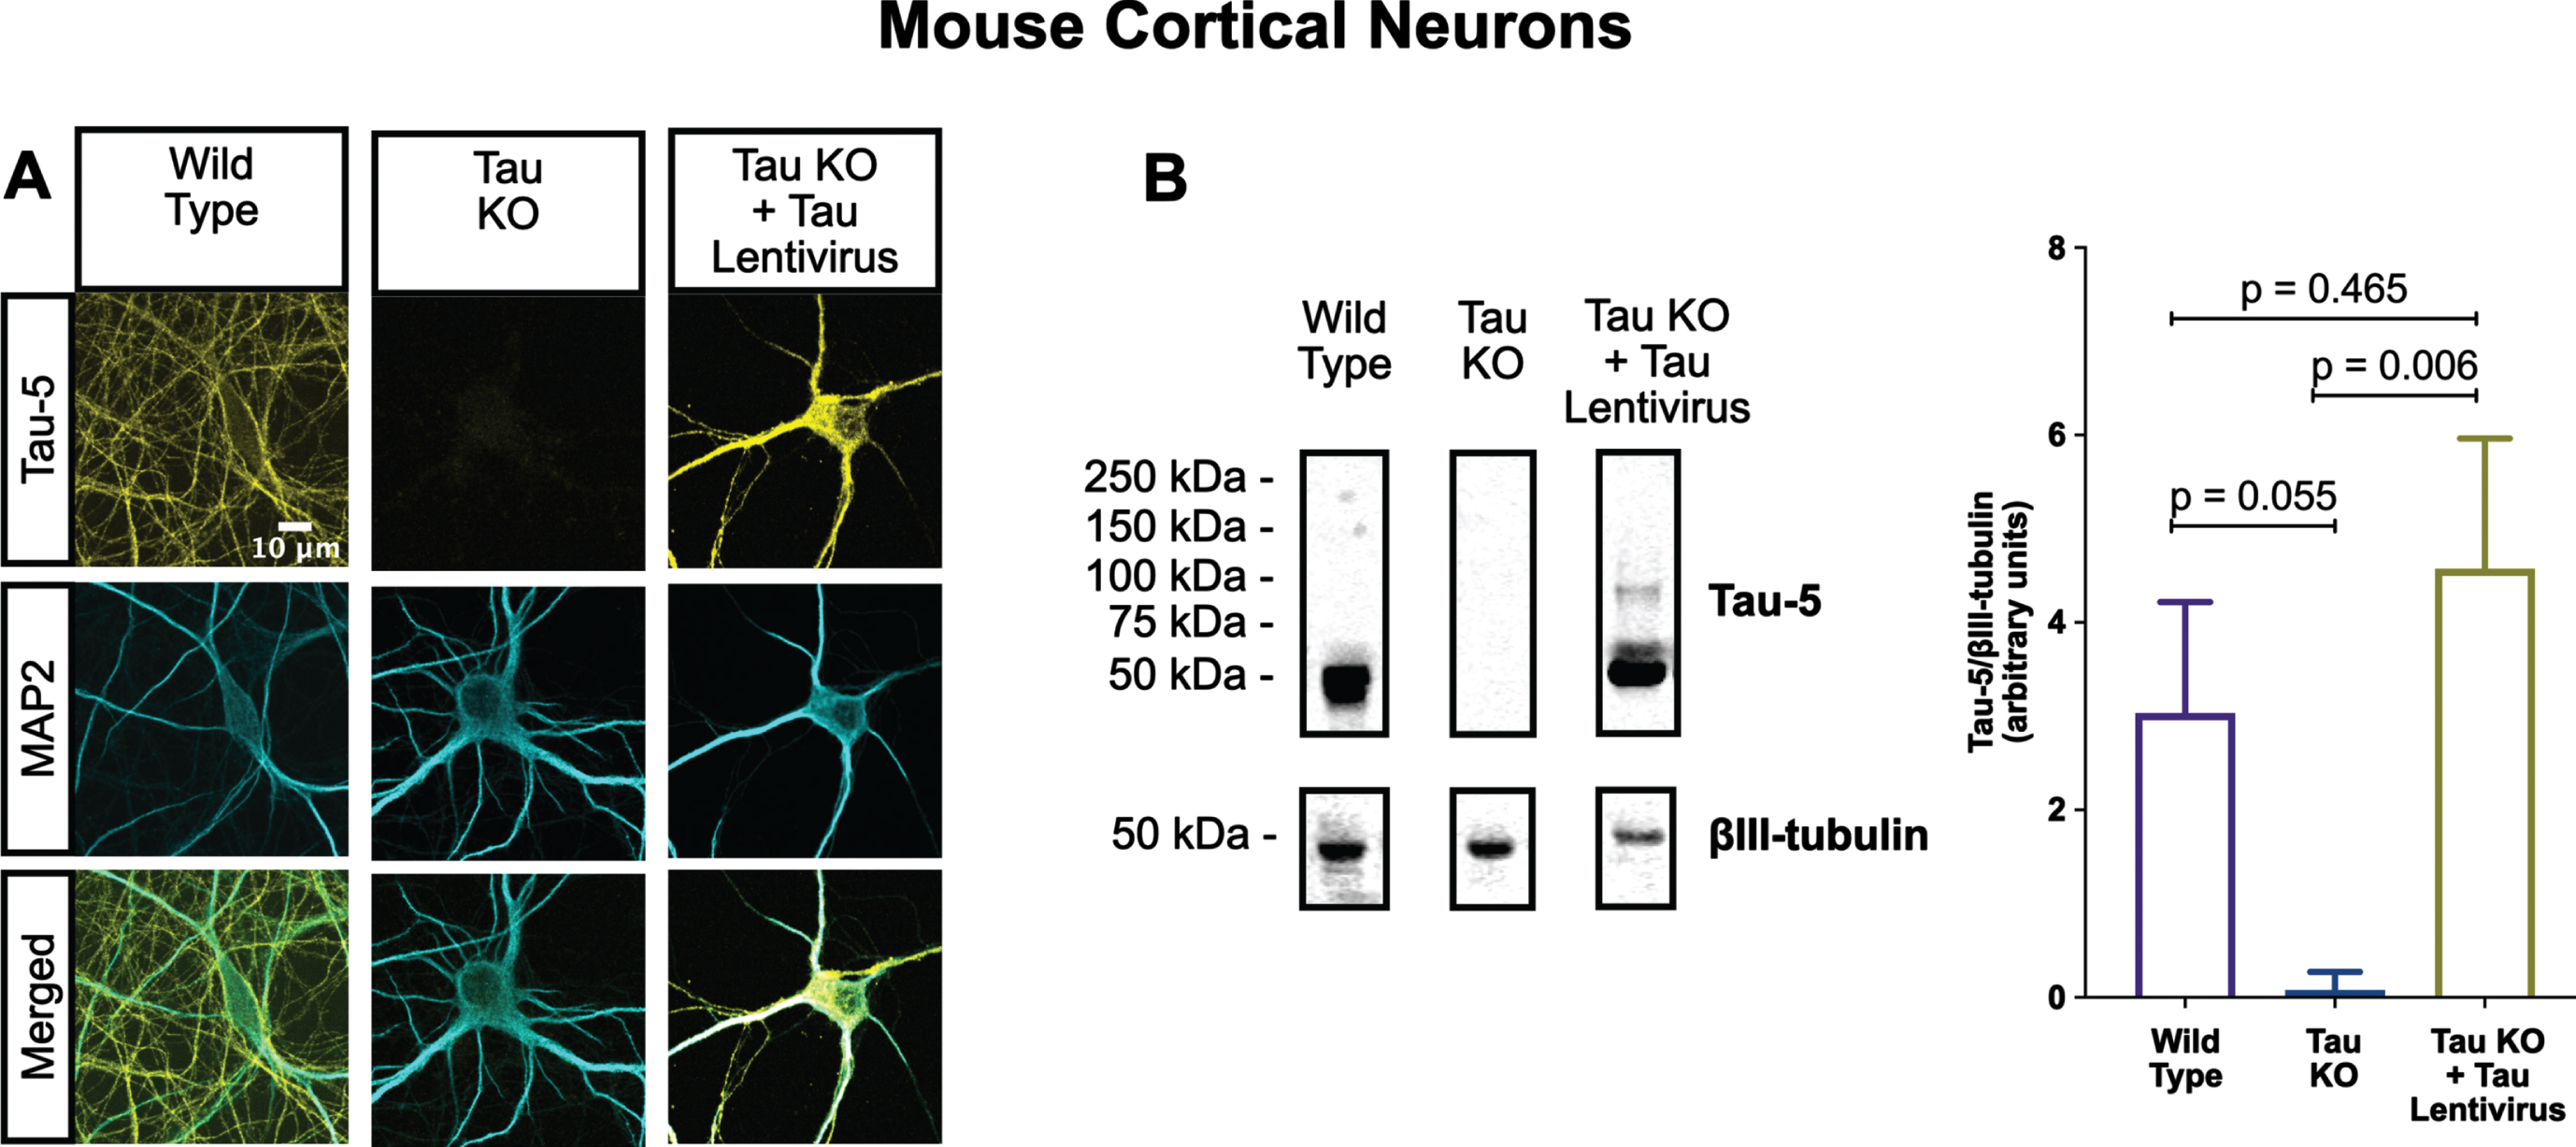 Lentiviral-encoded tau is expressed within normal levels in tau KO neurons. Shown here are detection of lentiviral-encoded human 2N4R tau in cultured tau KO neurons by immunofluorescence microscopy (A) and quantitative western blotting (B). Note that the average human tau expression level was ∼30% higher than the endogenous mouse tau expression level in cultured WT neurons, but the difference was not statistically different. Data were obtained from the following number of biological replicates: 3 for Wild Type, 6 for Tau KO and 3 for Tau KO + Tau Lentivirus. p-values are based on two-tailed unpaired t-tests, pooled variance. Error bars on the graph represent±standard error of the mean.